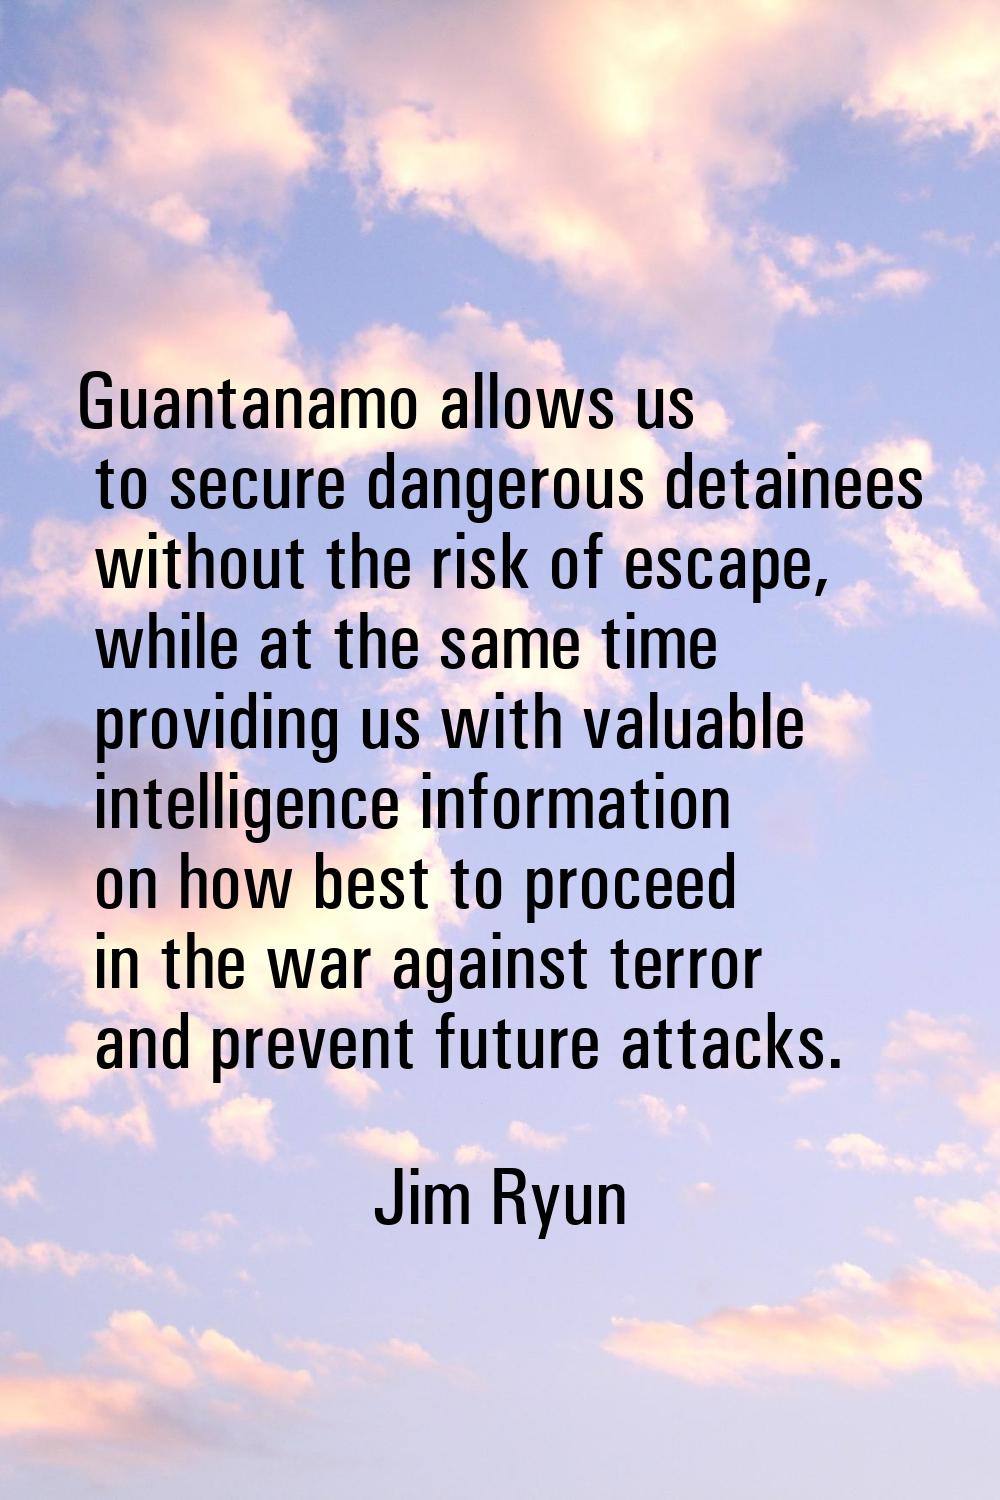 Guantanamo allows us to secure dangerous detainees without the risk of escape, while at the same ti